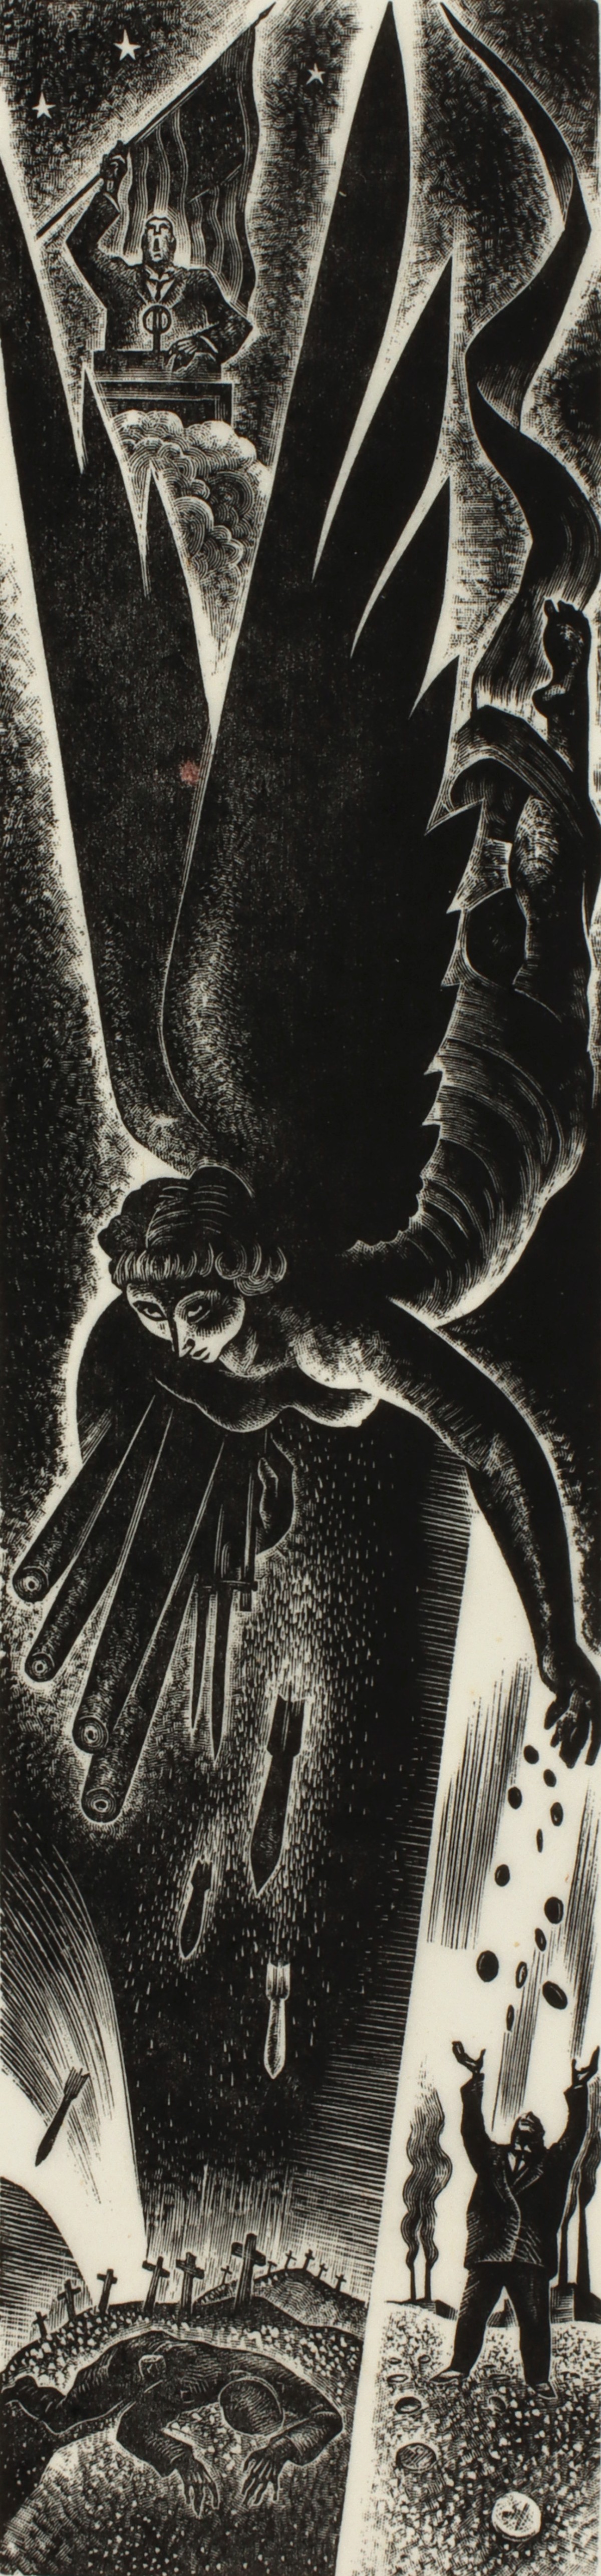 LYND WARD (1905-1985) PENCIL SIGNED WOOD ENGRAVING